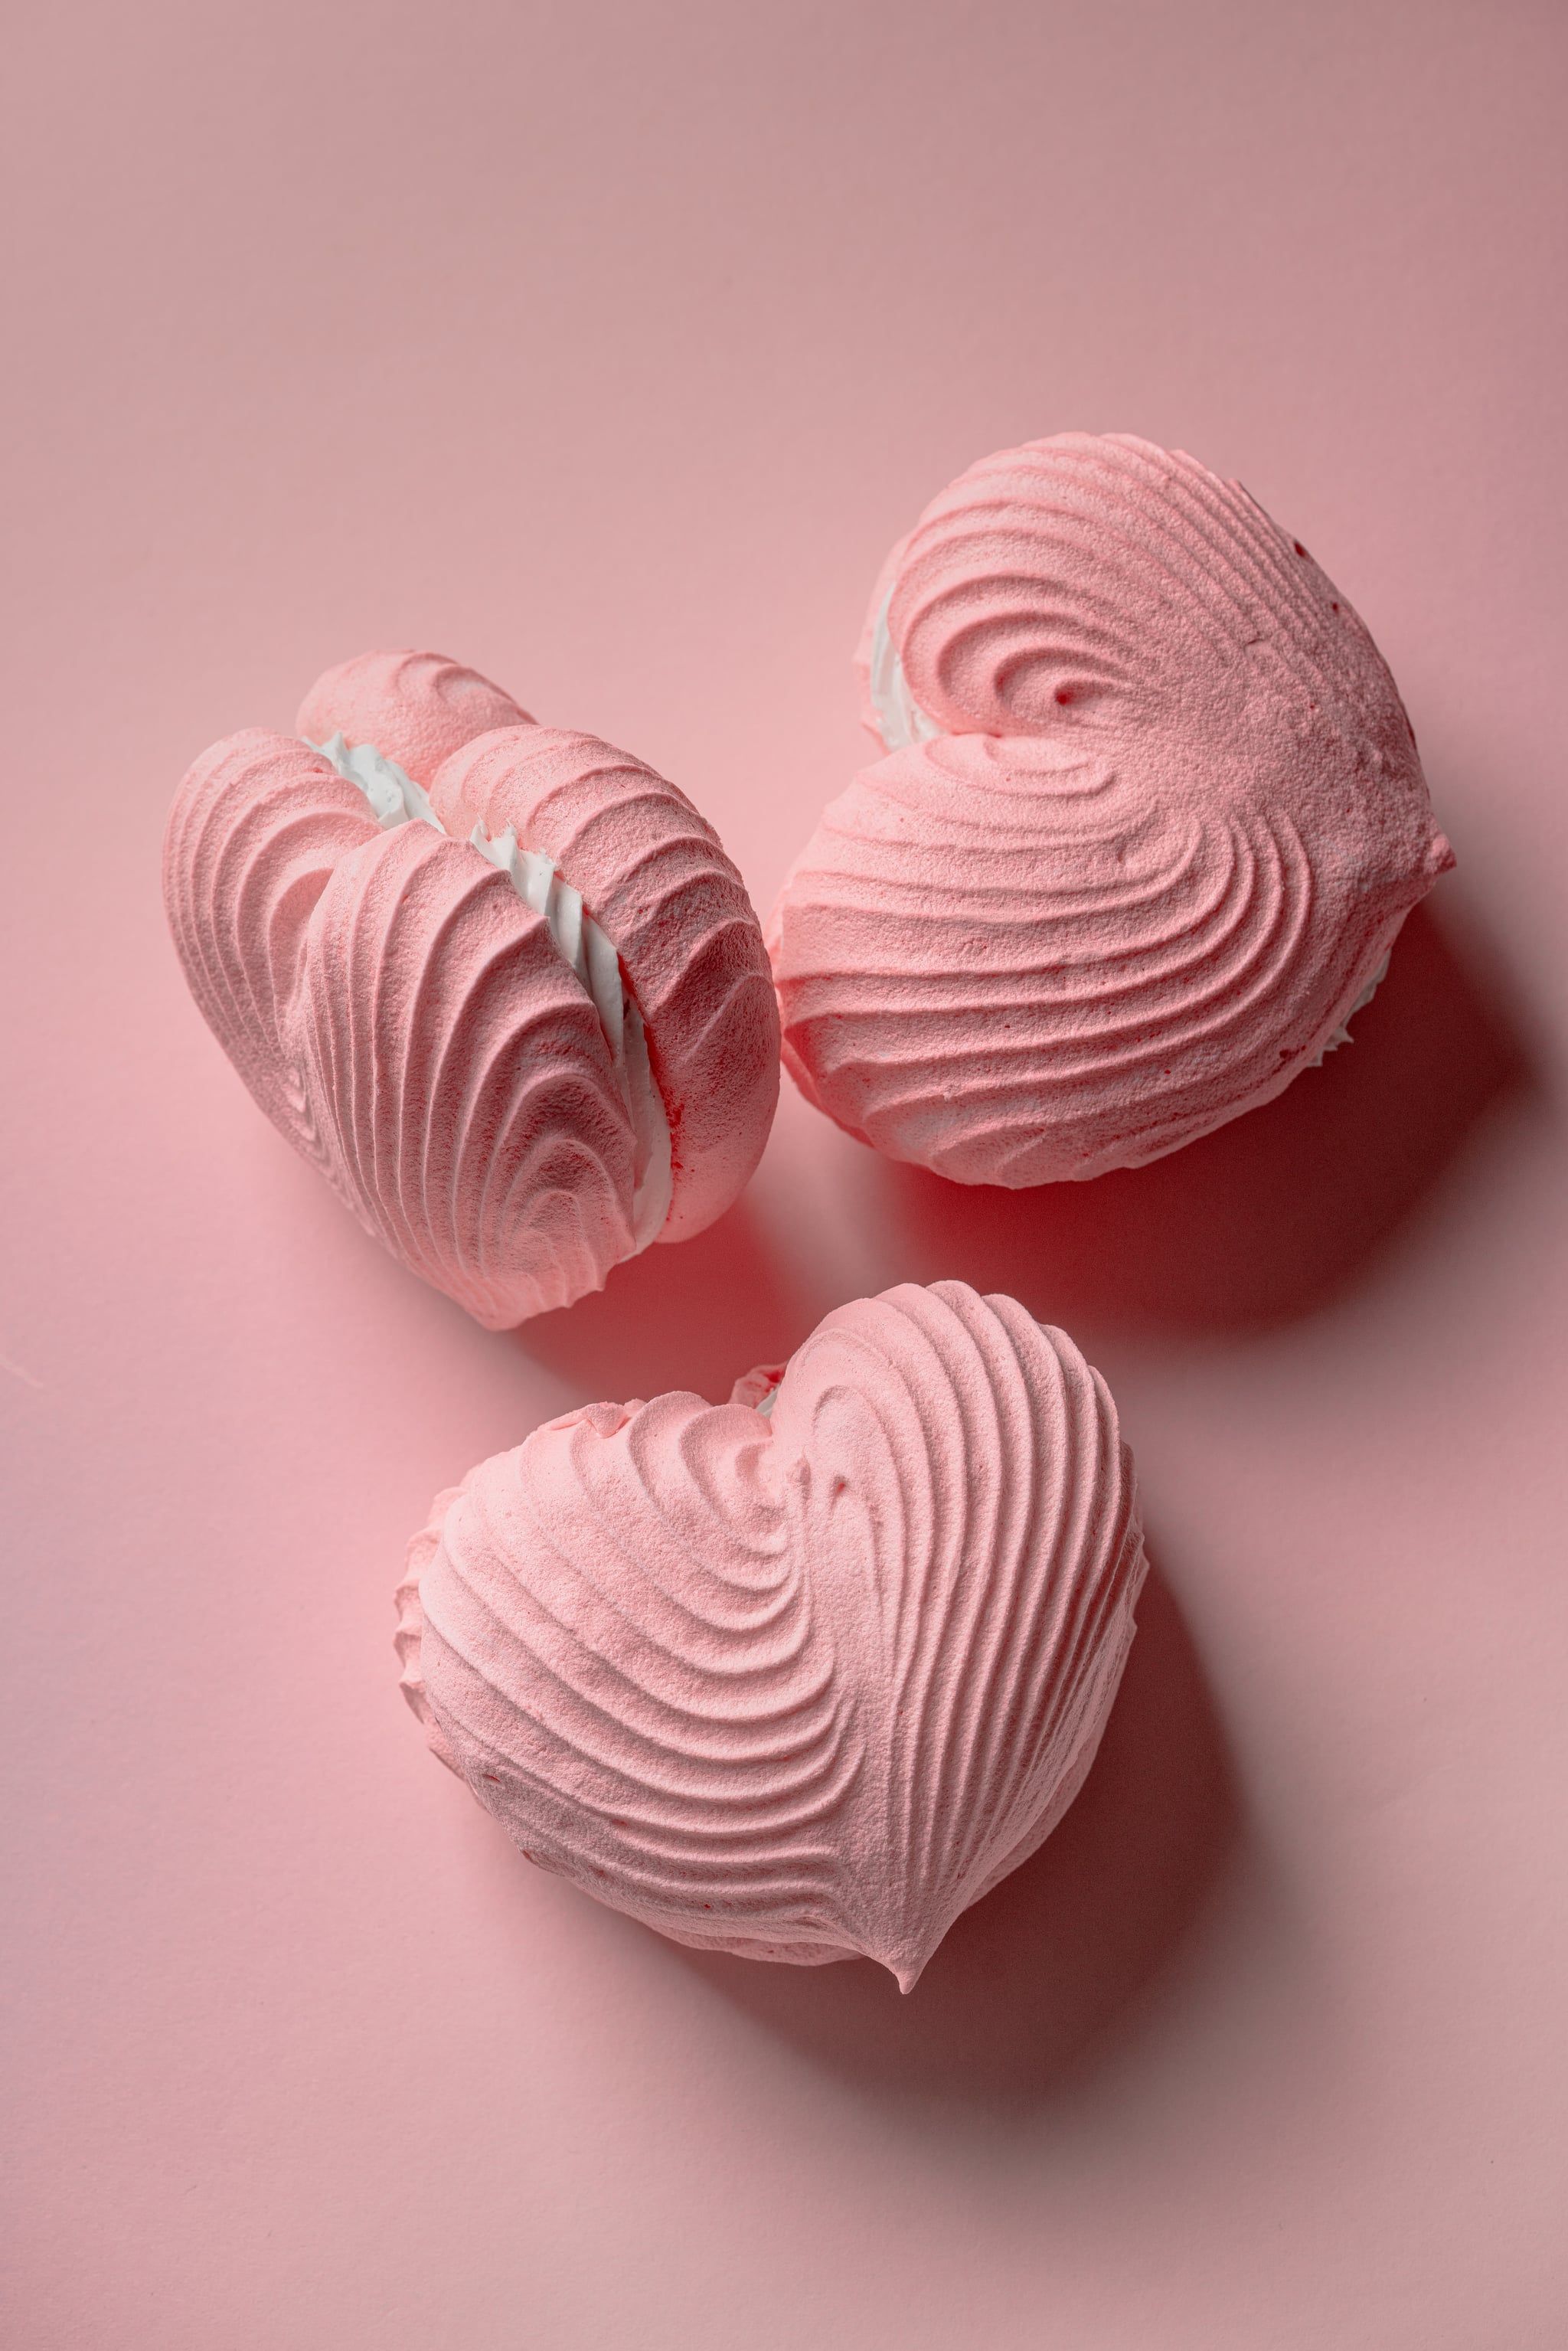 Valentine's Day Wallpaper: Pink Heart Pastries. The Dreamiest iPhone Wallpaper For Valentine's Day That Fit Any Aesthetic